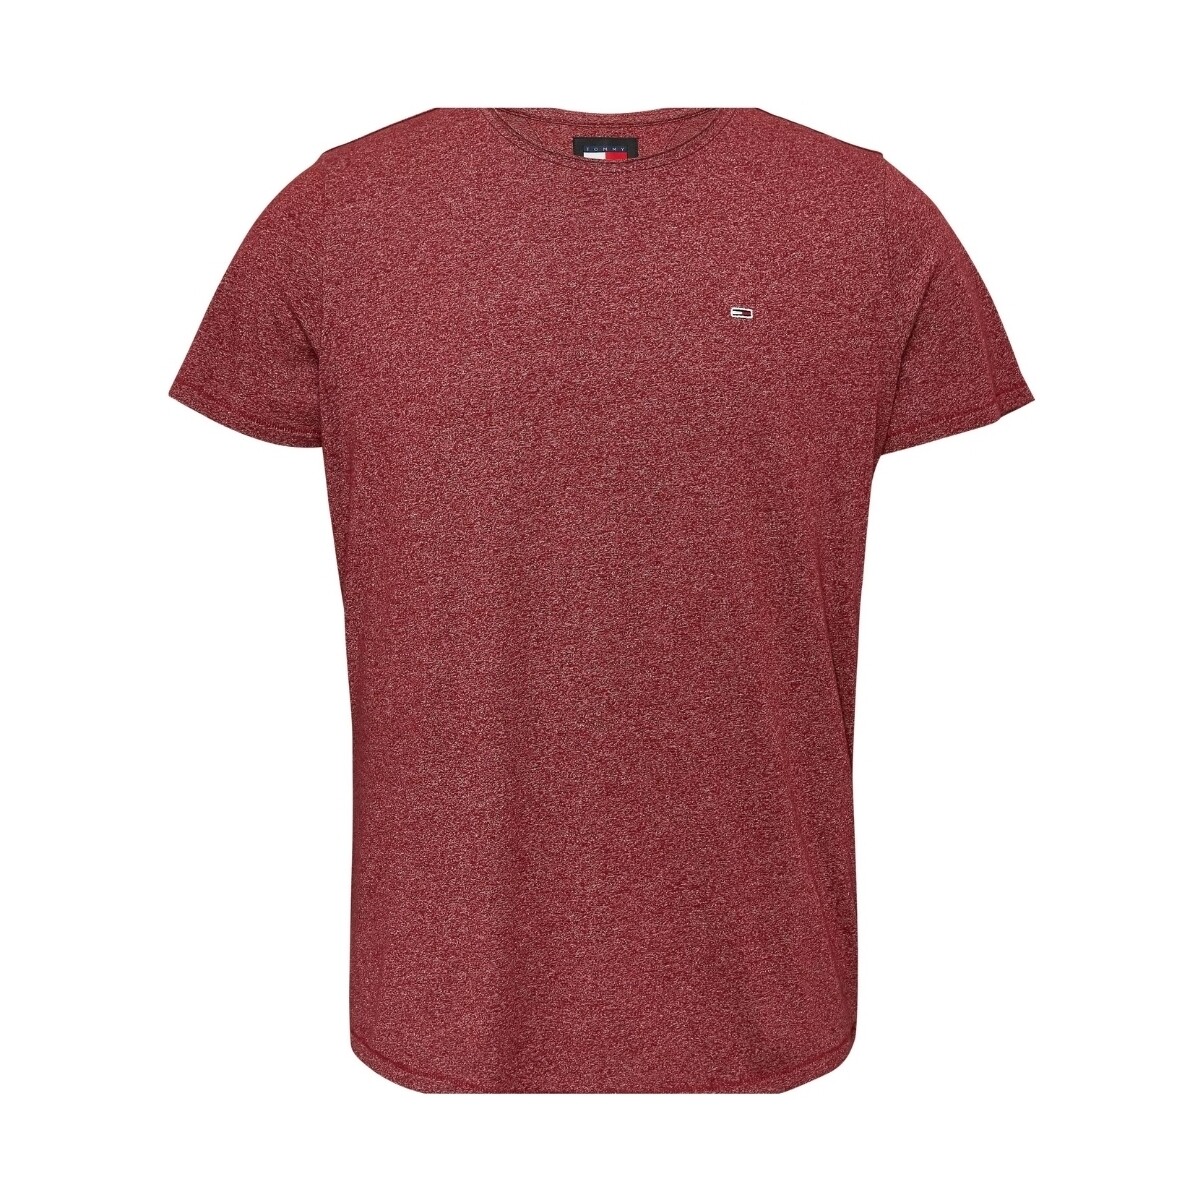 Vêtements Homme T-shirts & Polos Tommy Jeans T Shirt homme  Ref 61914 XMO Rouge Rouge